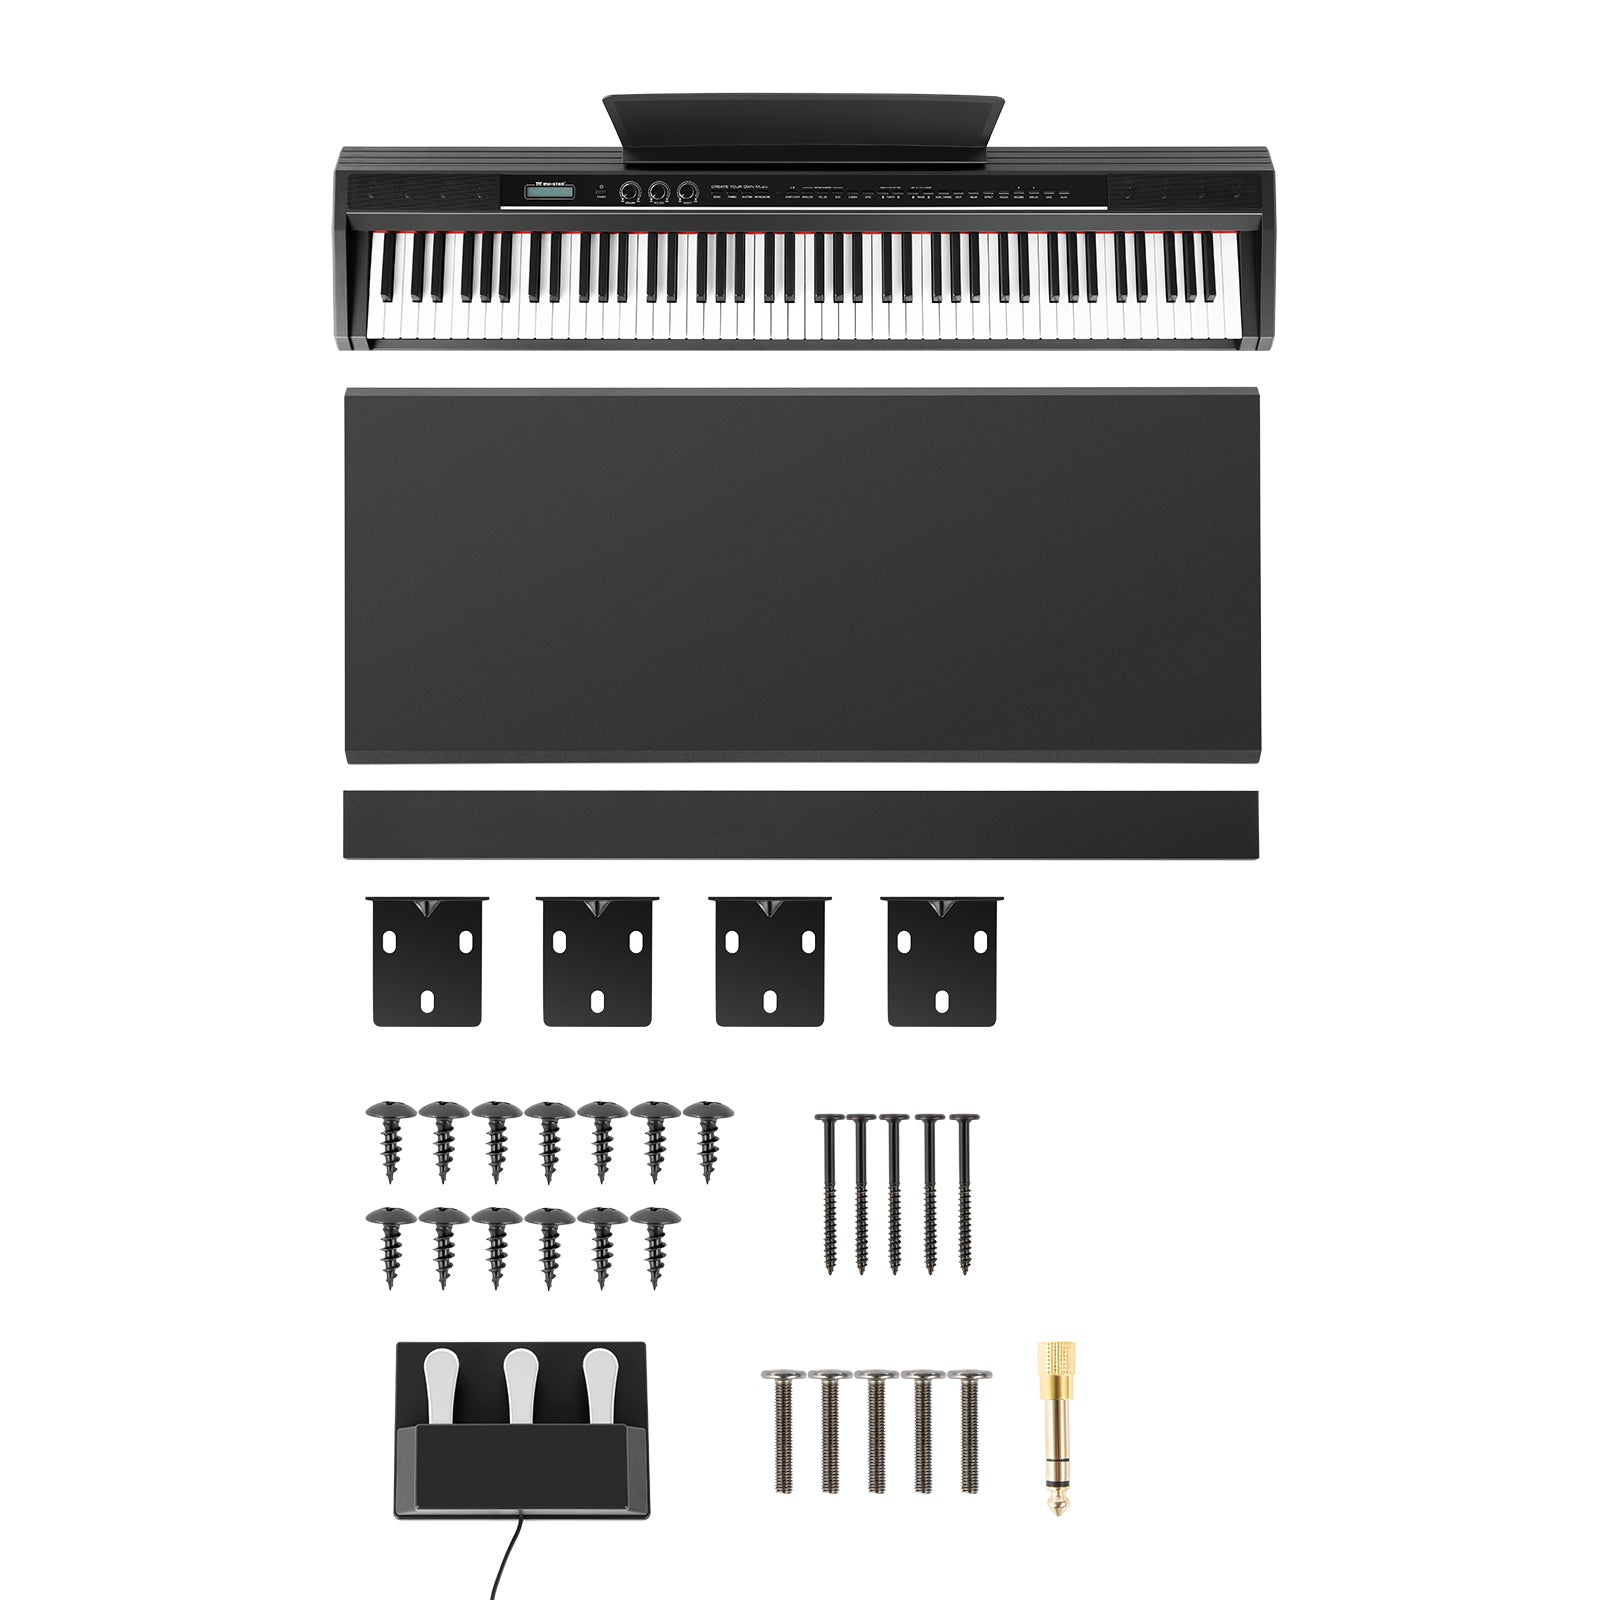 MUSTAR MDP-1500, Digital Piano Keyboard, 88 Keys Weighted Keyboard, Hammer Action Electronic Keyboards, 3 Pedals, Furniture Stand Black